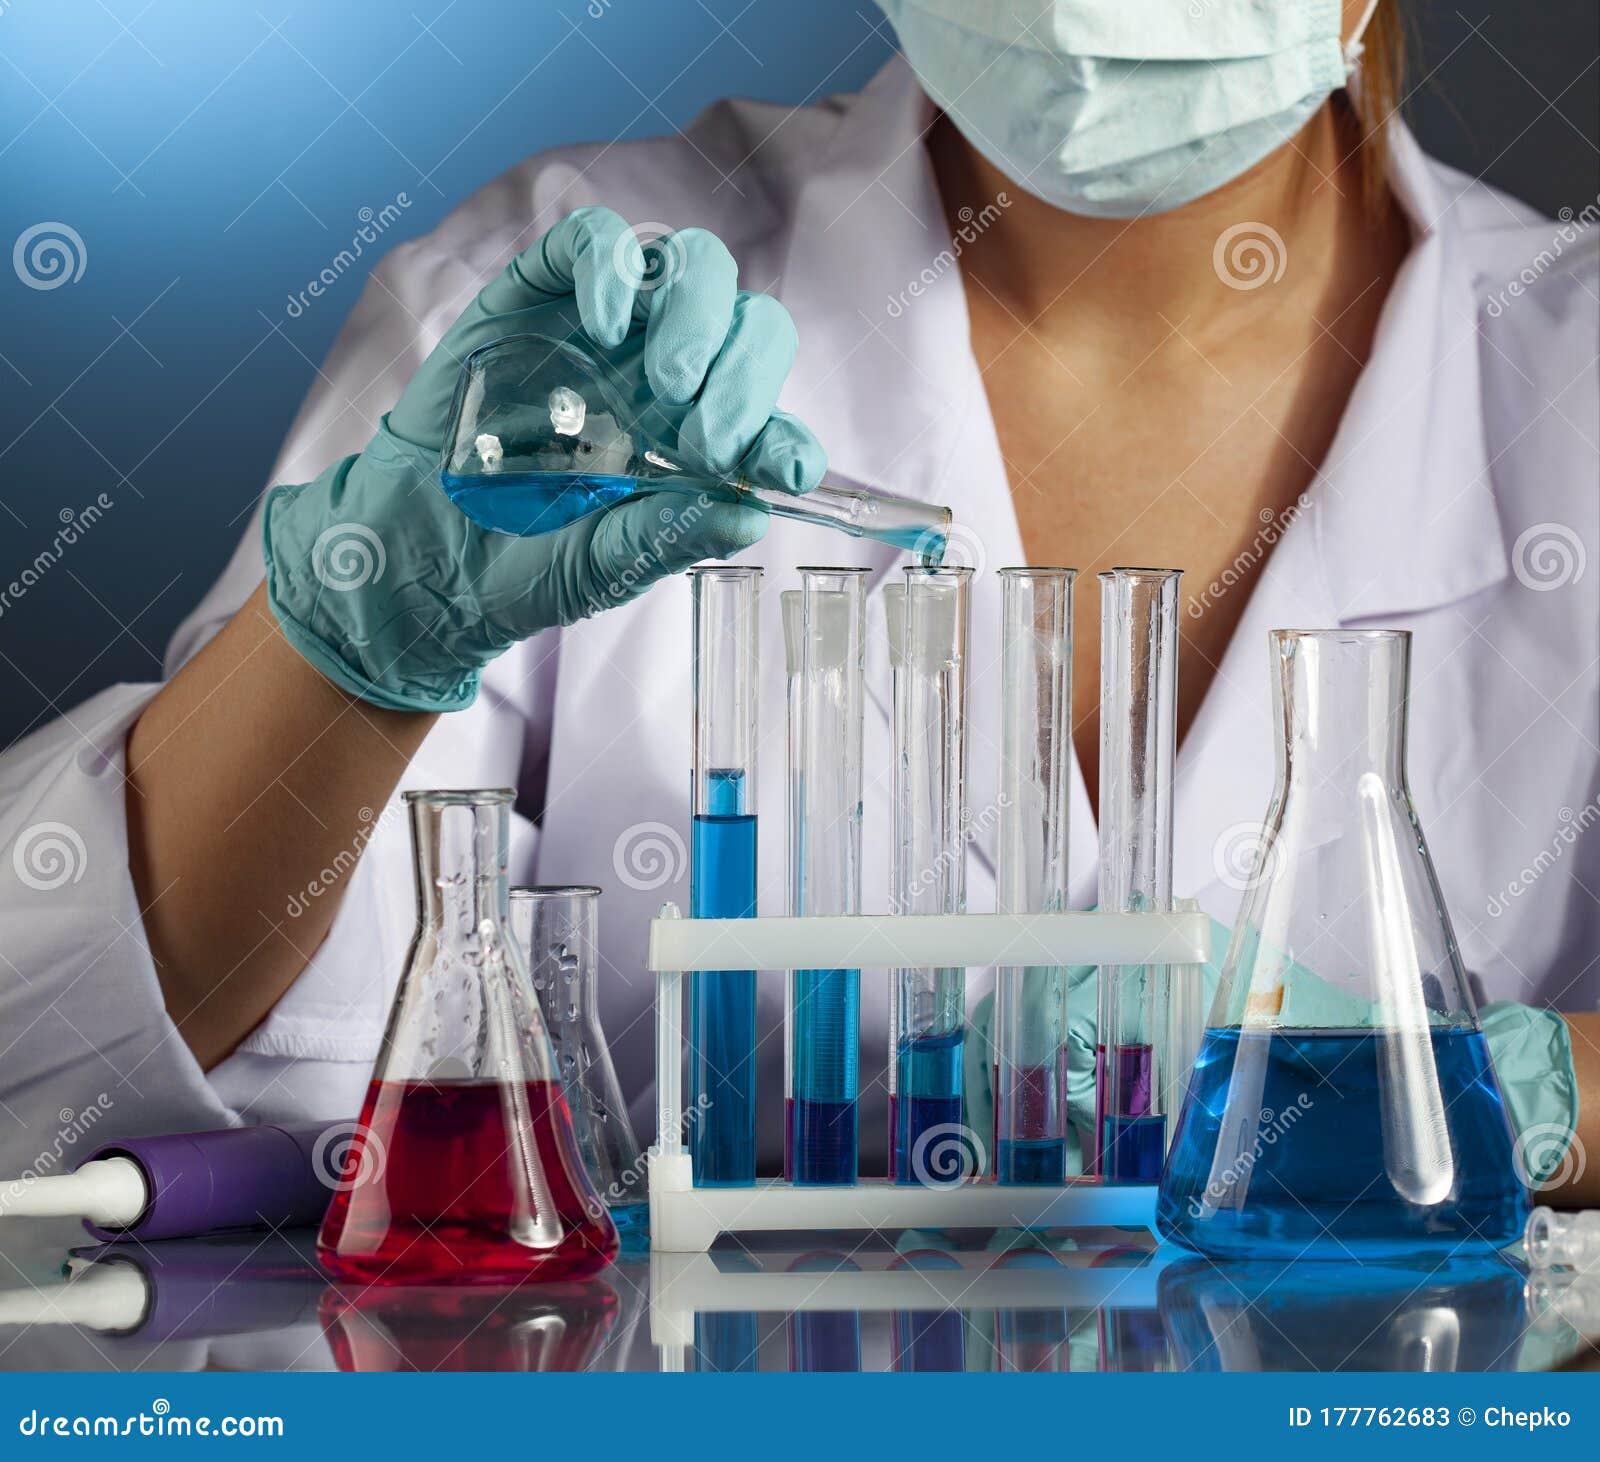 Scientist With Test Tubes Stock Image Image Of Laboratories 177762683